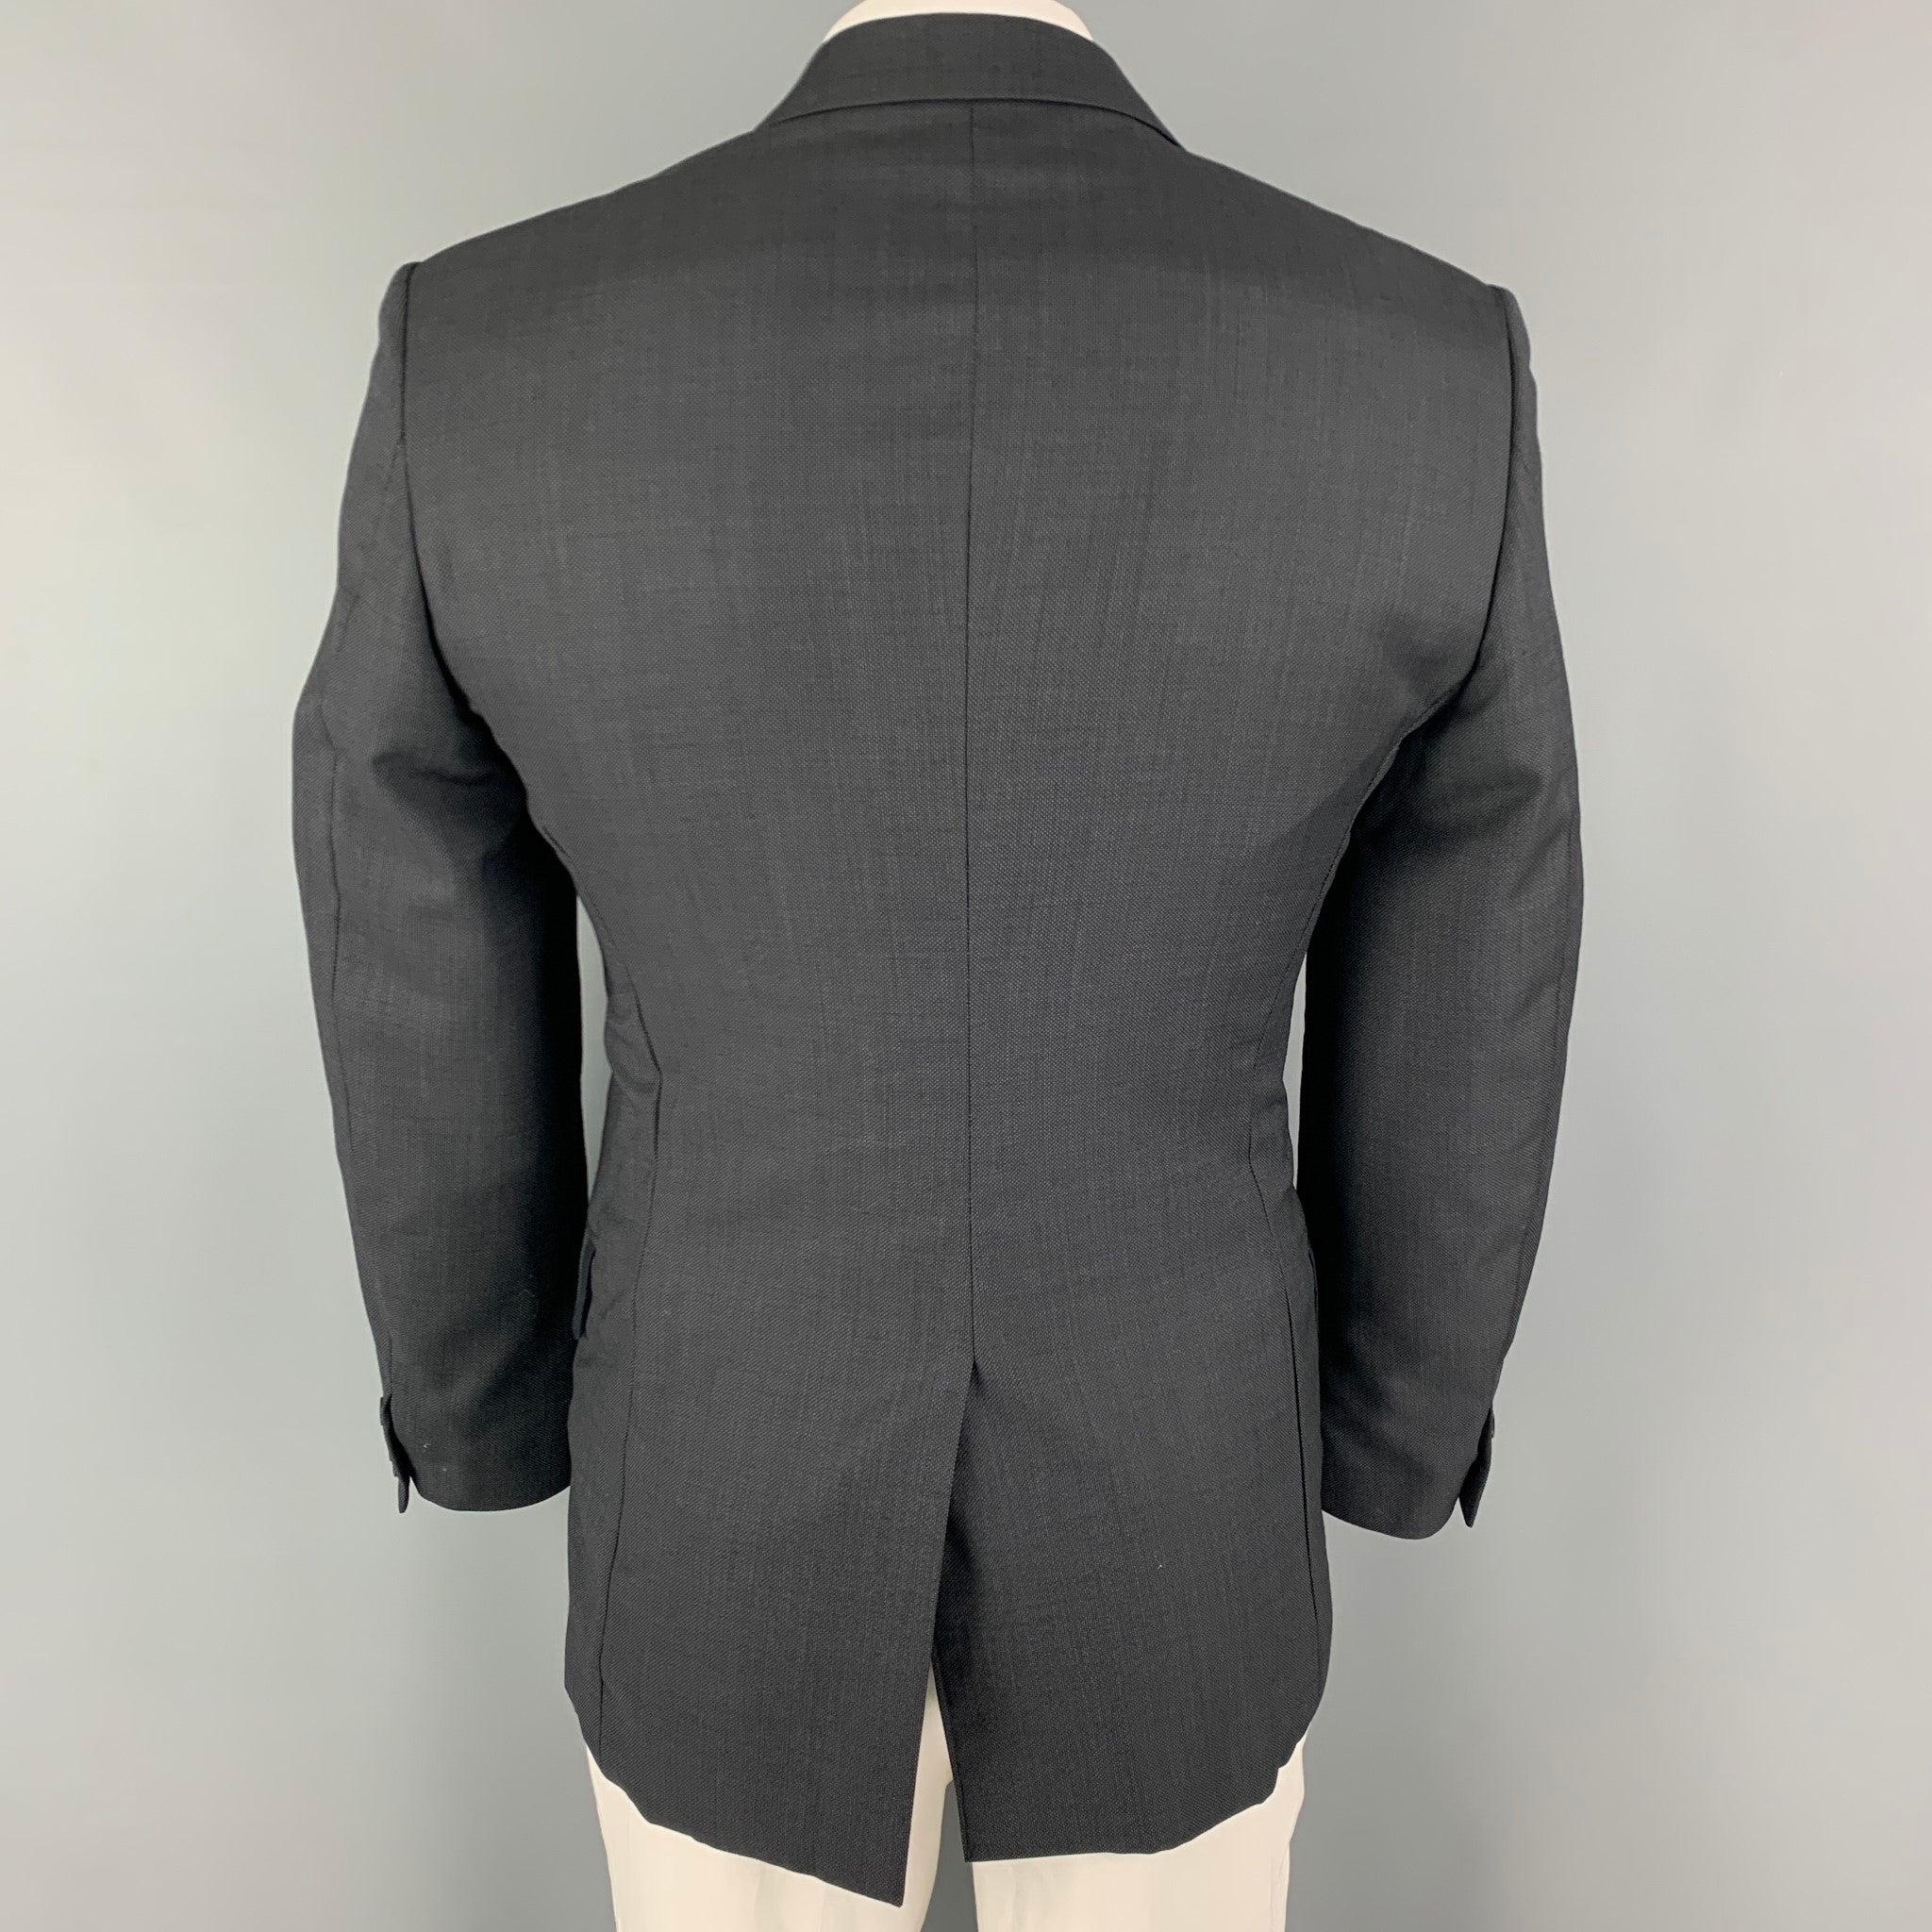 VERSACE COLLECTION Size 40 Charcoal Black Woven Wool Sport Coat In Good Condition For Sale In San Francisco, CA